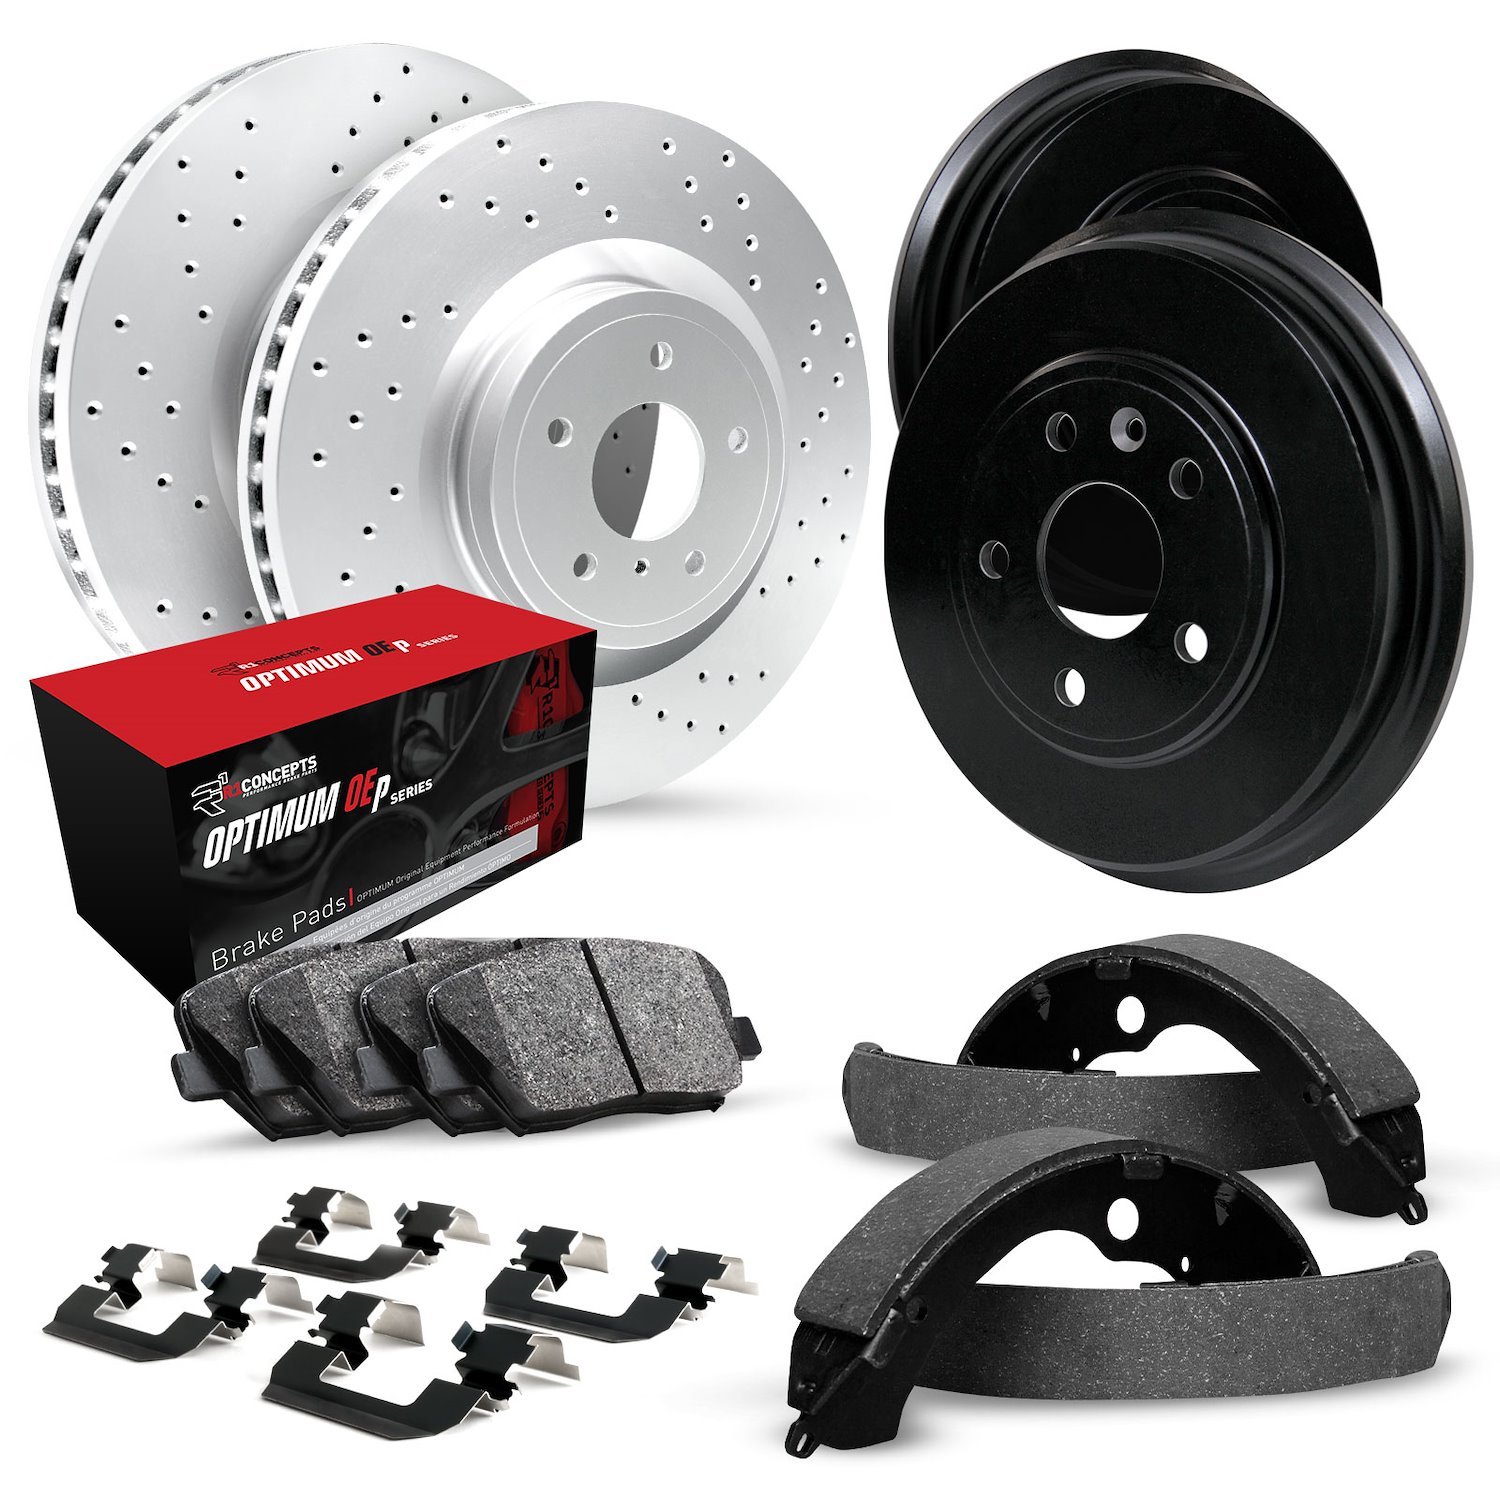 GEO-Carbon Drilled Brake Rotor & Drum Set w/Optimum OE Pads, Shoes, & Hardware, 2001-2005 GM, Position: Front & Rear